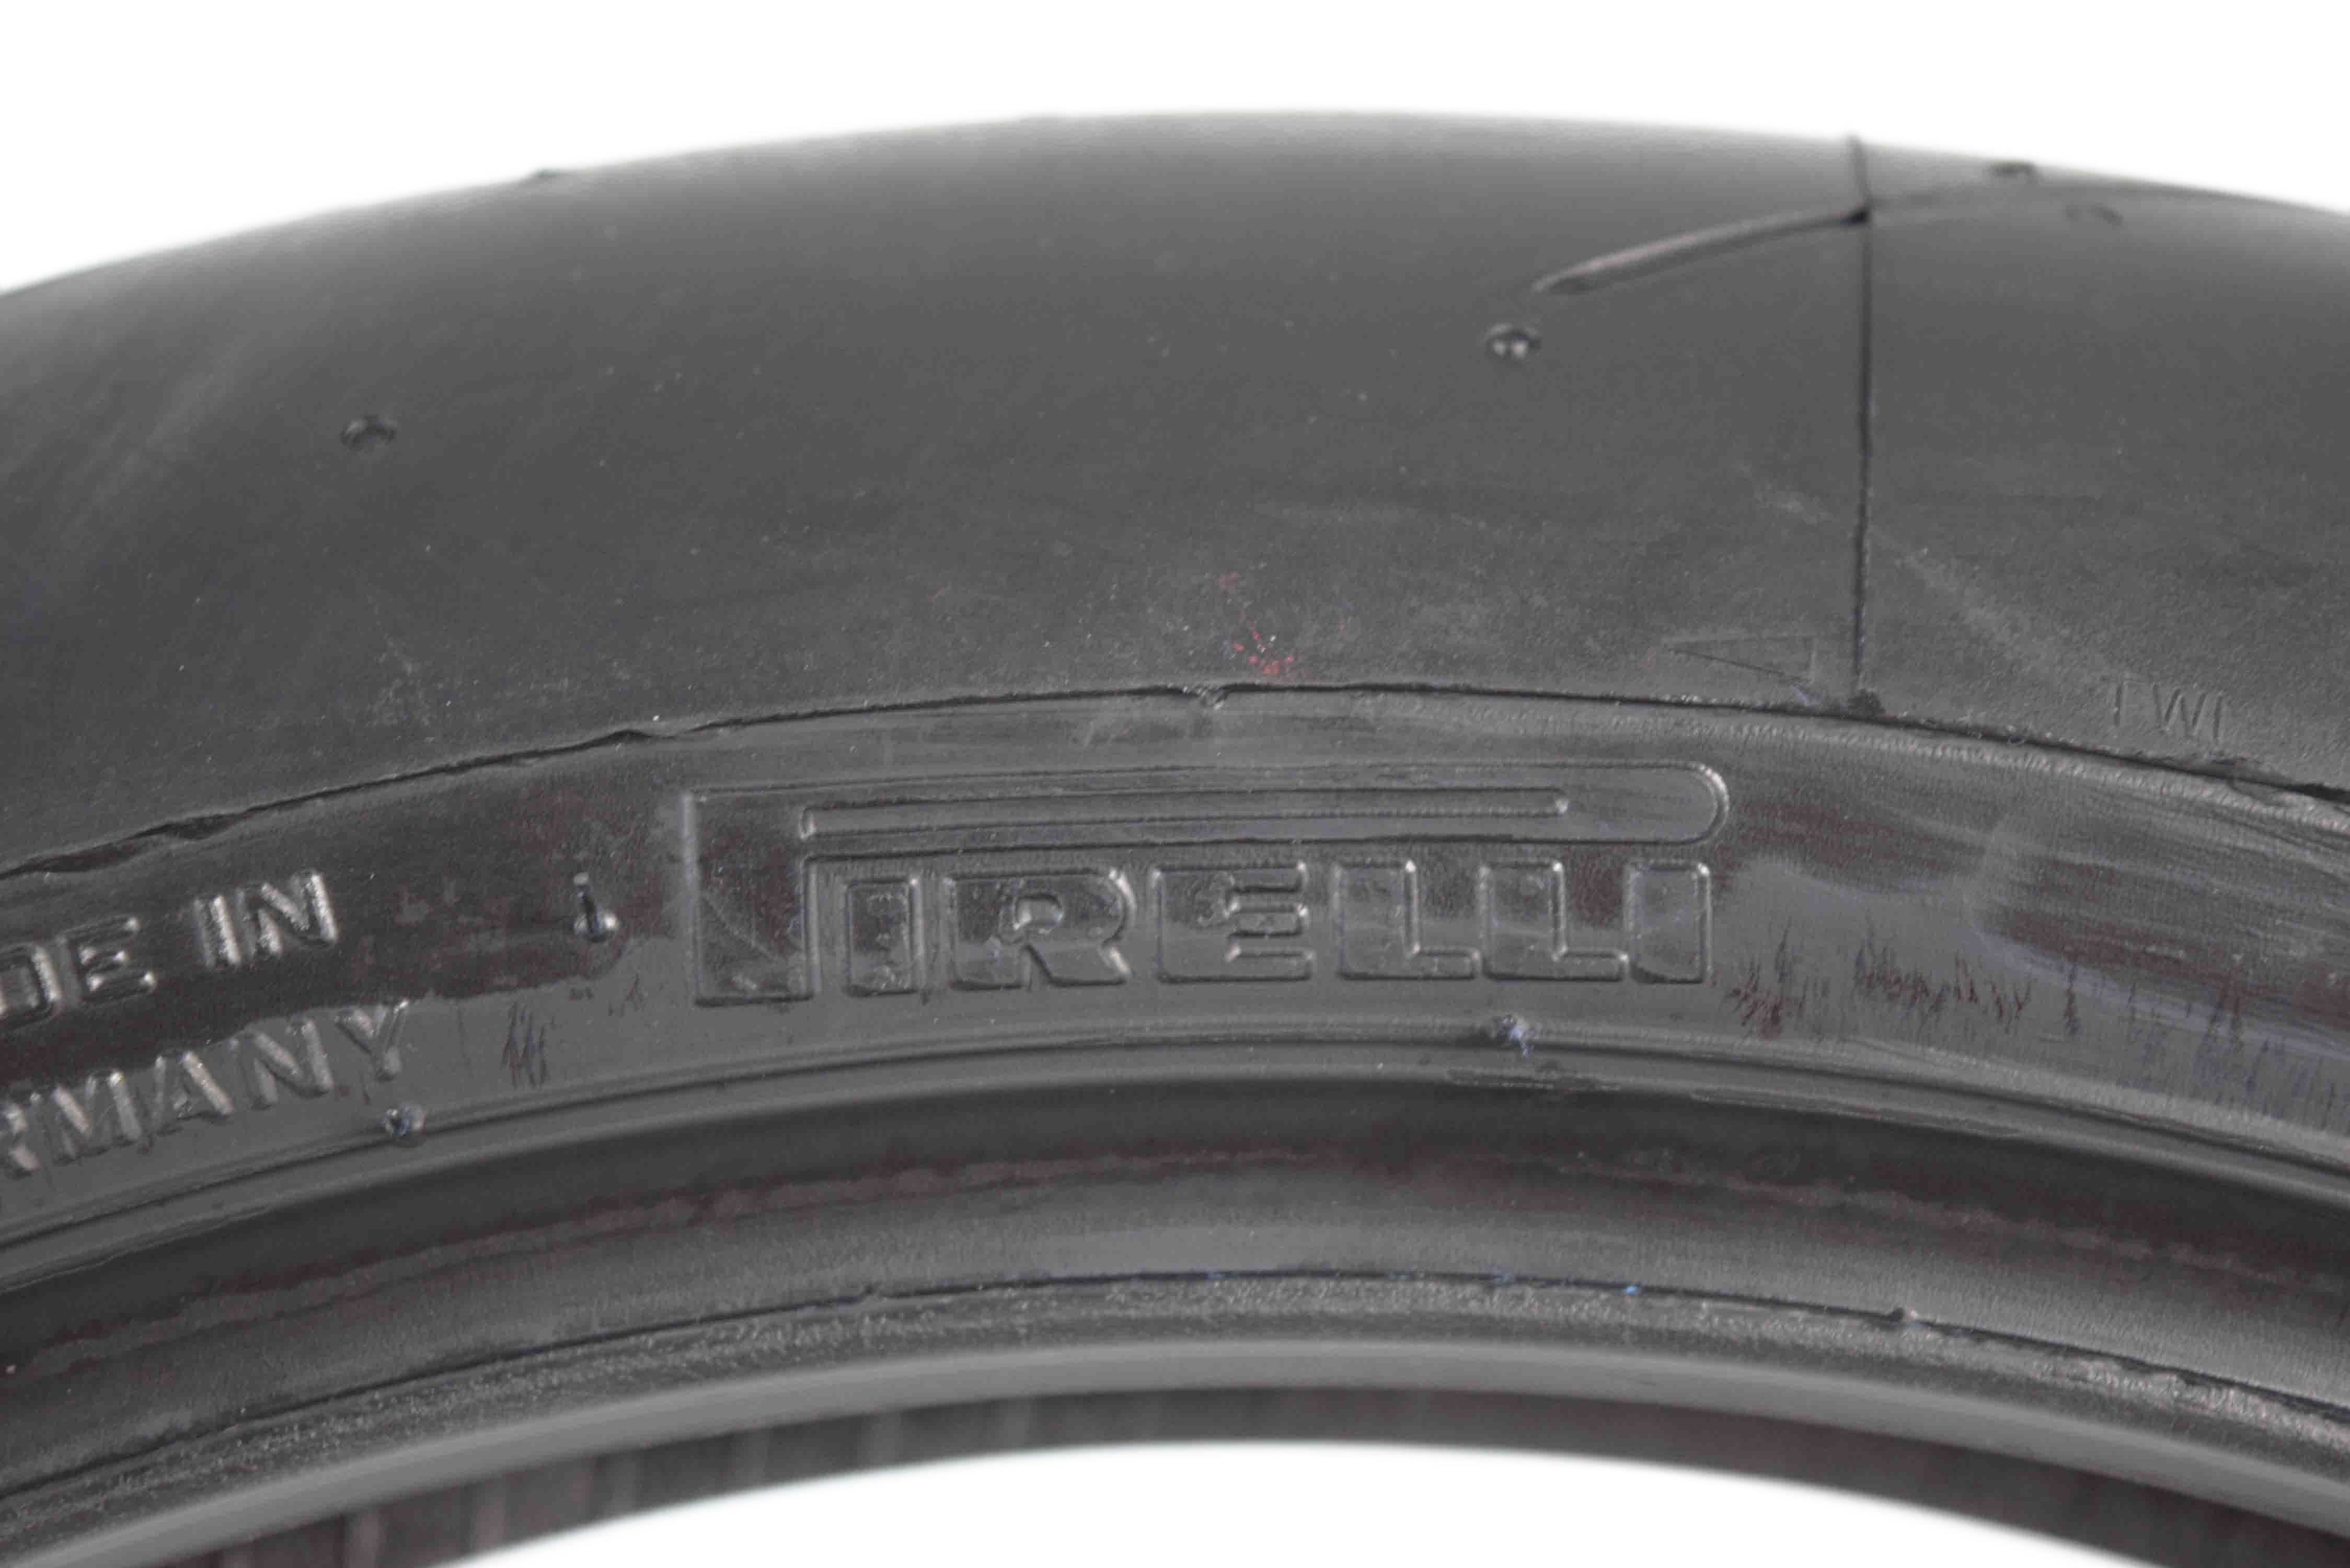 PIRELLI-TIRES-Front-120-70ZR17-Rear-180-55ZR17-SUPER-CORSA-V2-Motorcycle-Tires-image-5